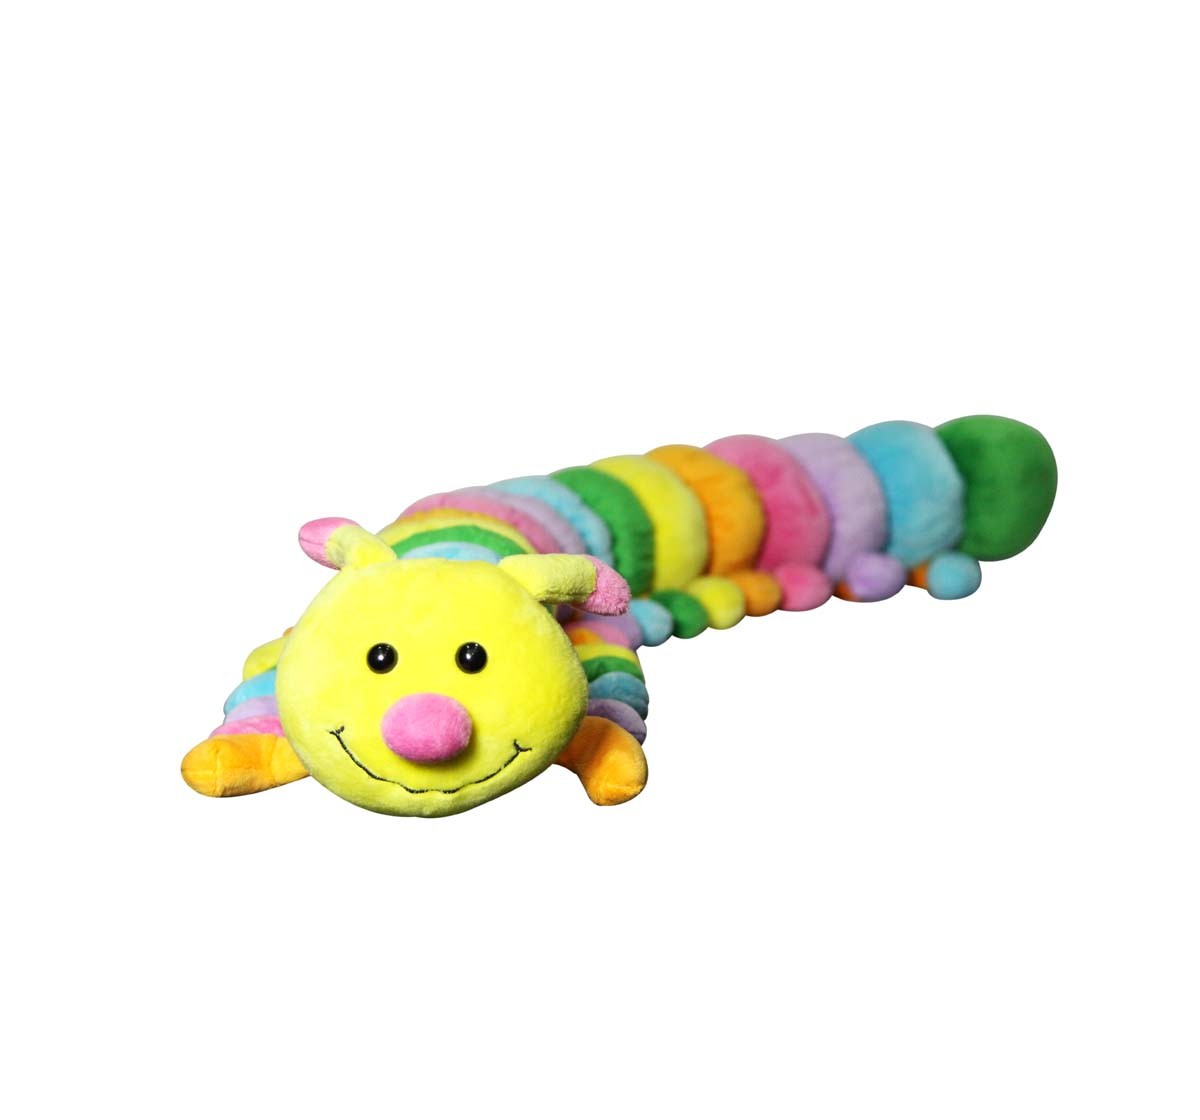  Soft Buddies Caterpillar Jungle Animal Car Rear Tray Table (Xl) Quirky Soft Toys for Kids age 12M+ 12.7 Cm 